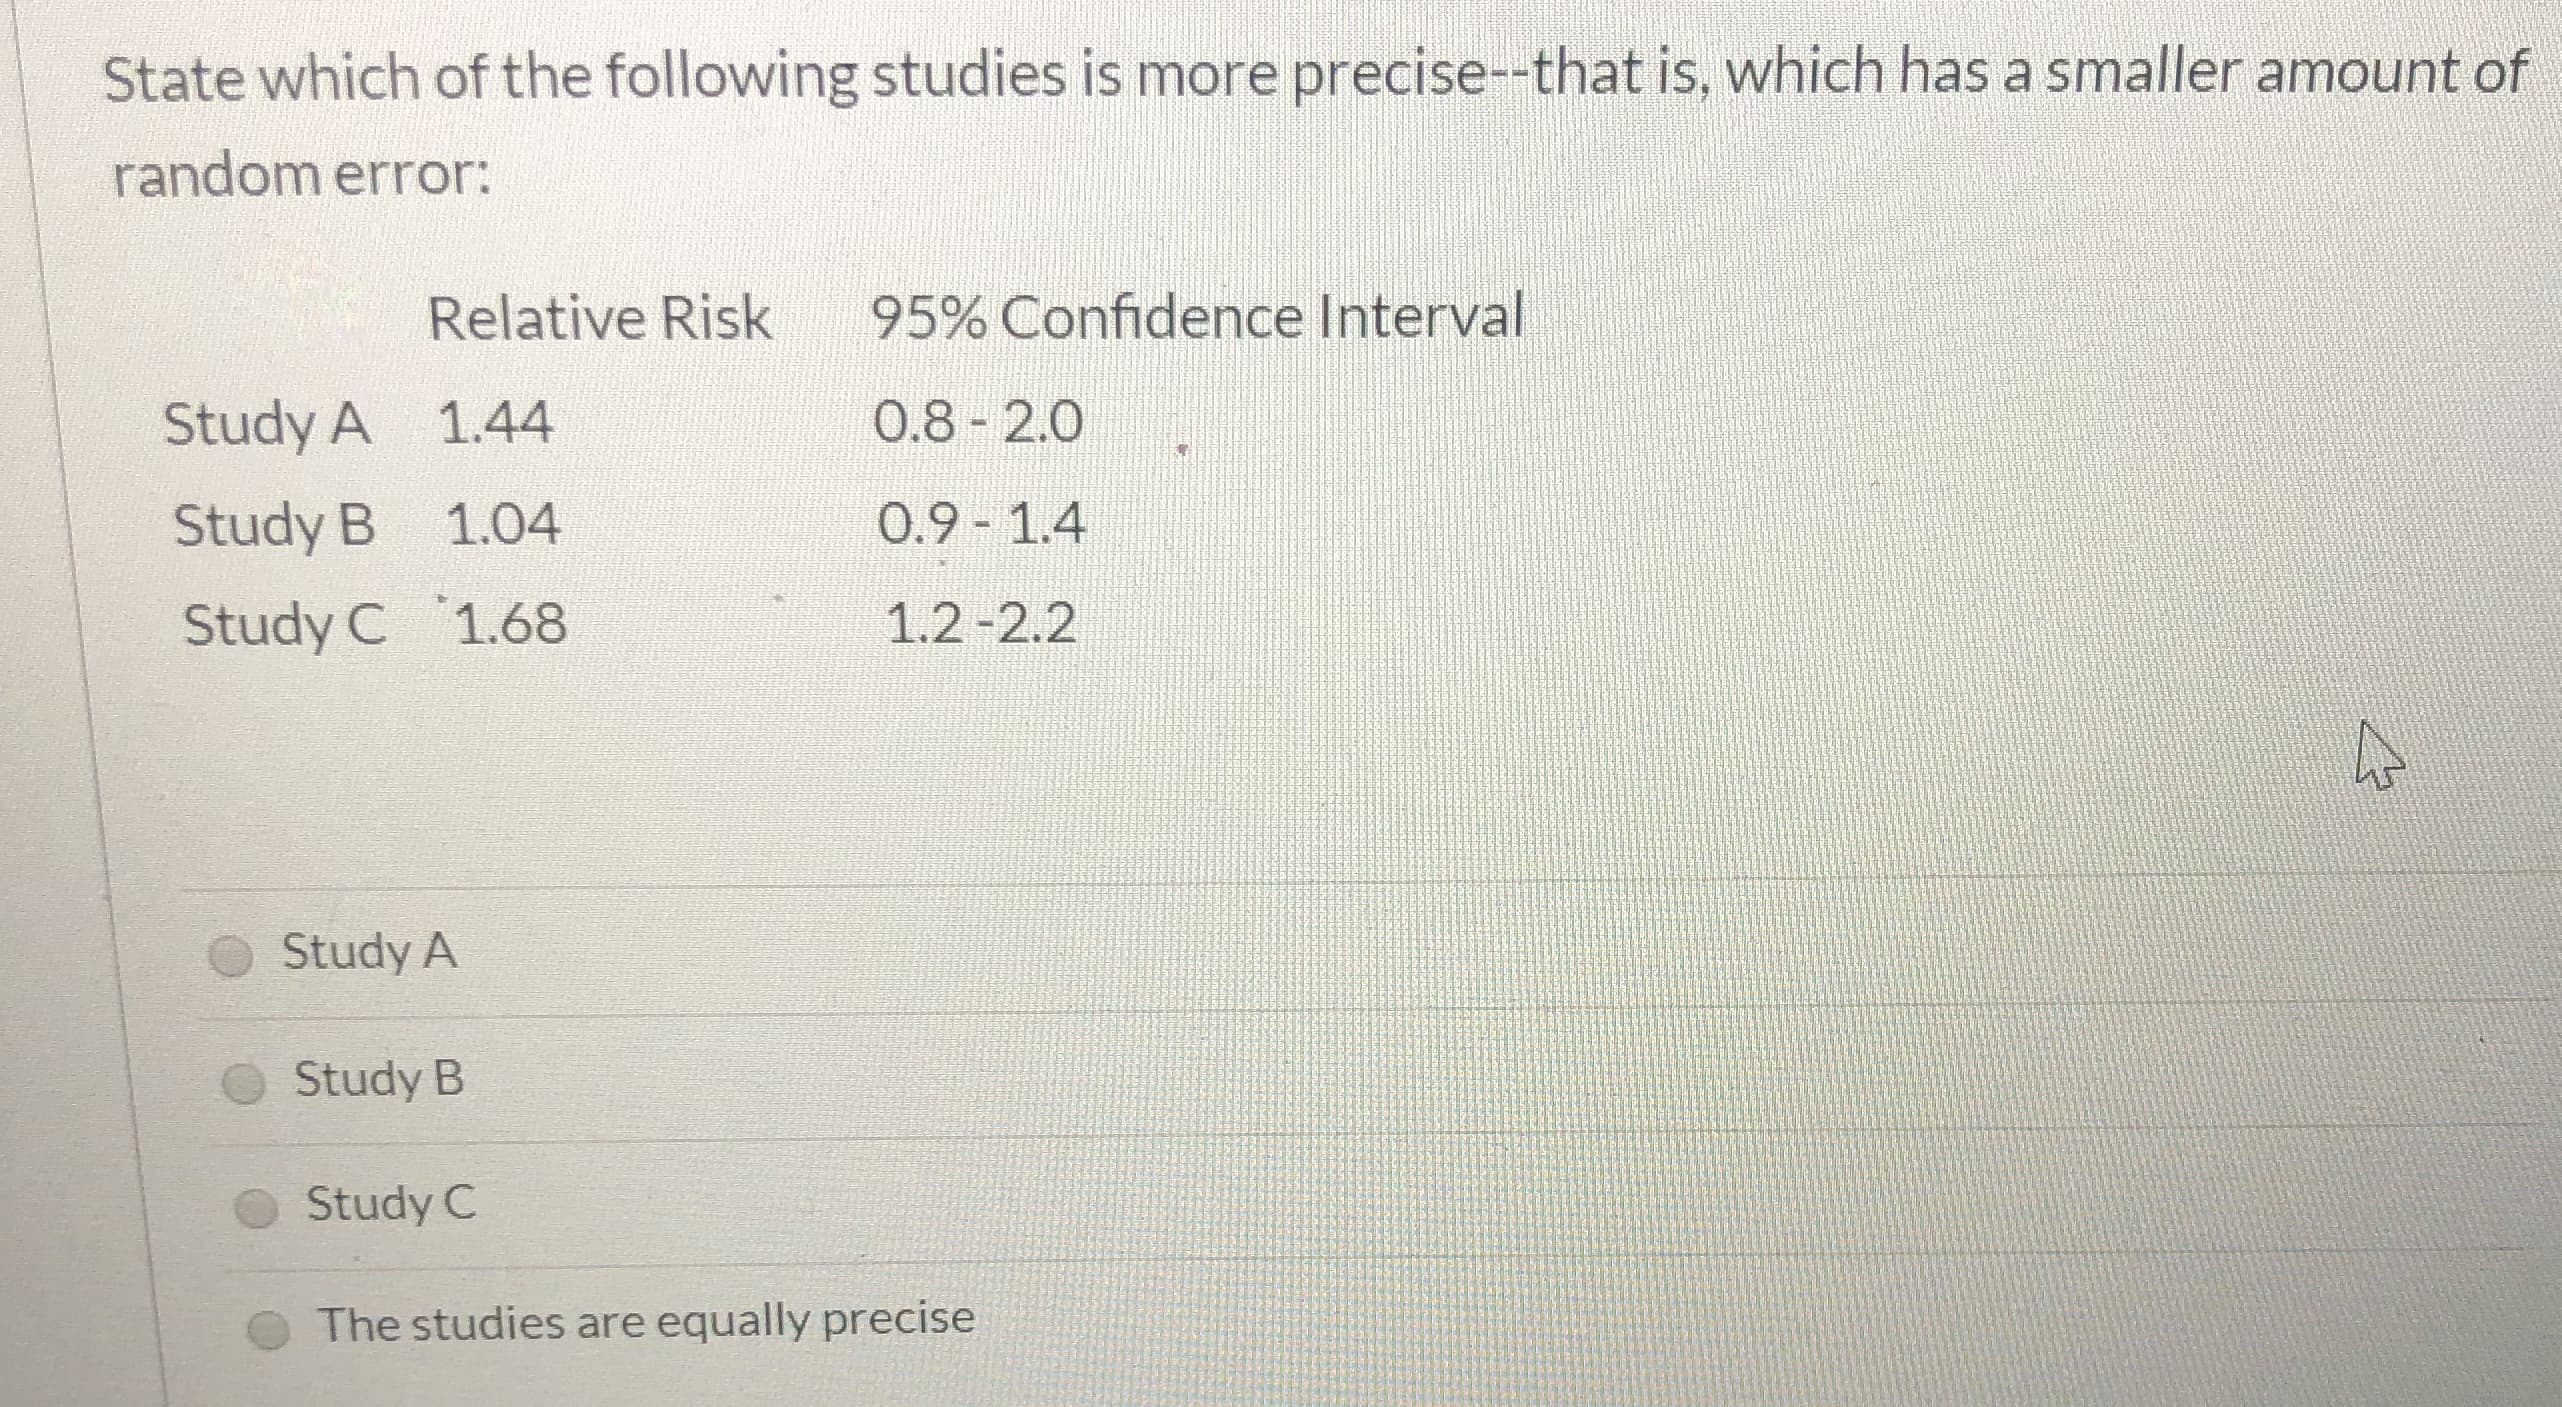 State which of the following studies is more precise--that is, which has a smaller amount of
random error:
Relative Risk
95% Confidence Interval
O.8-2.0
Study A 1.44
O.9 1.4
Study B
1.04
Study C 1.68
1.2-2.2
Study A
Study B
Study C
The studies are equally precise
